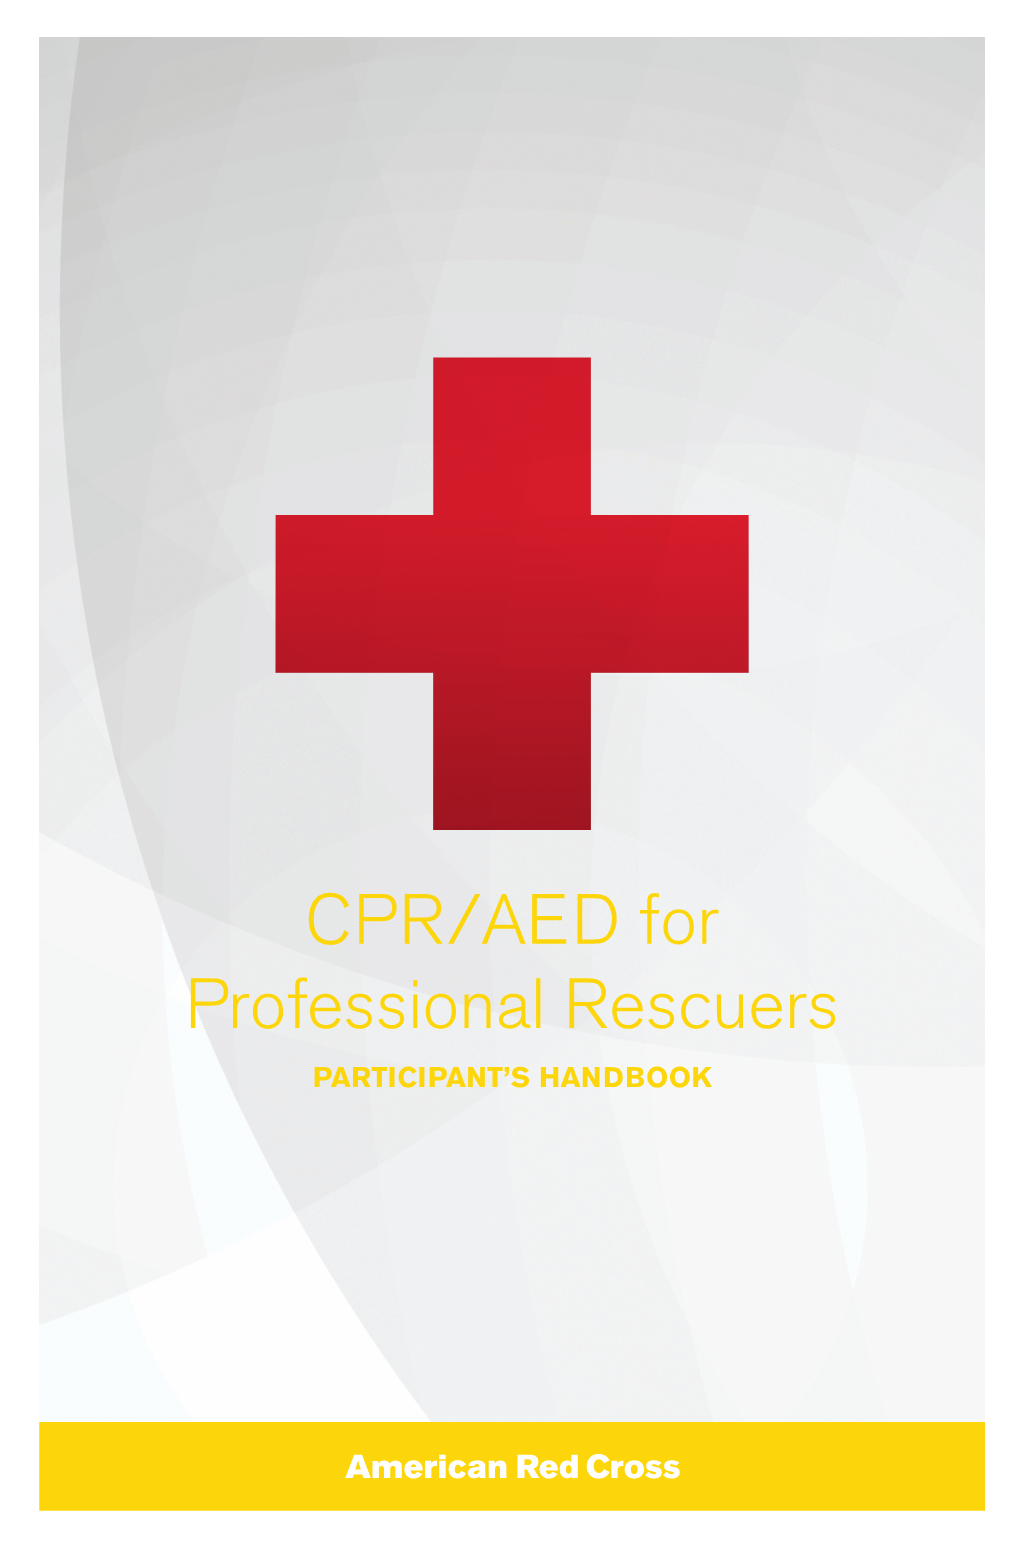 CPR/AED for Professional Rescuers Handbook